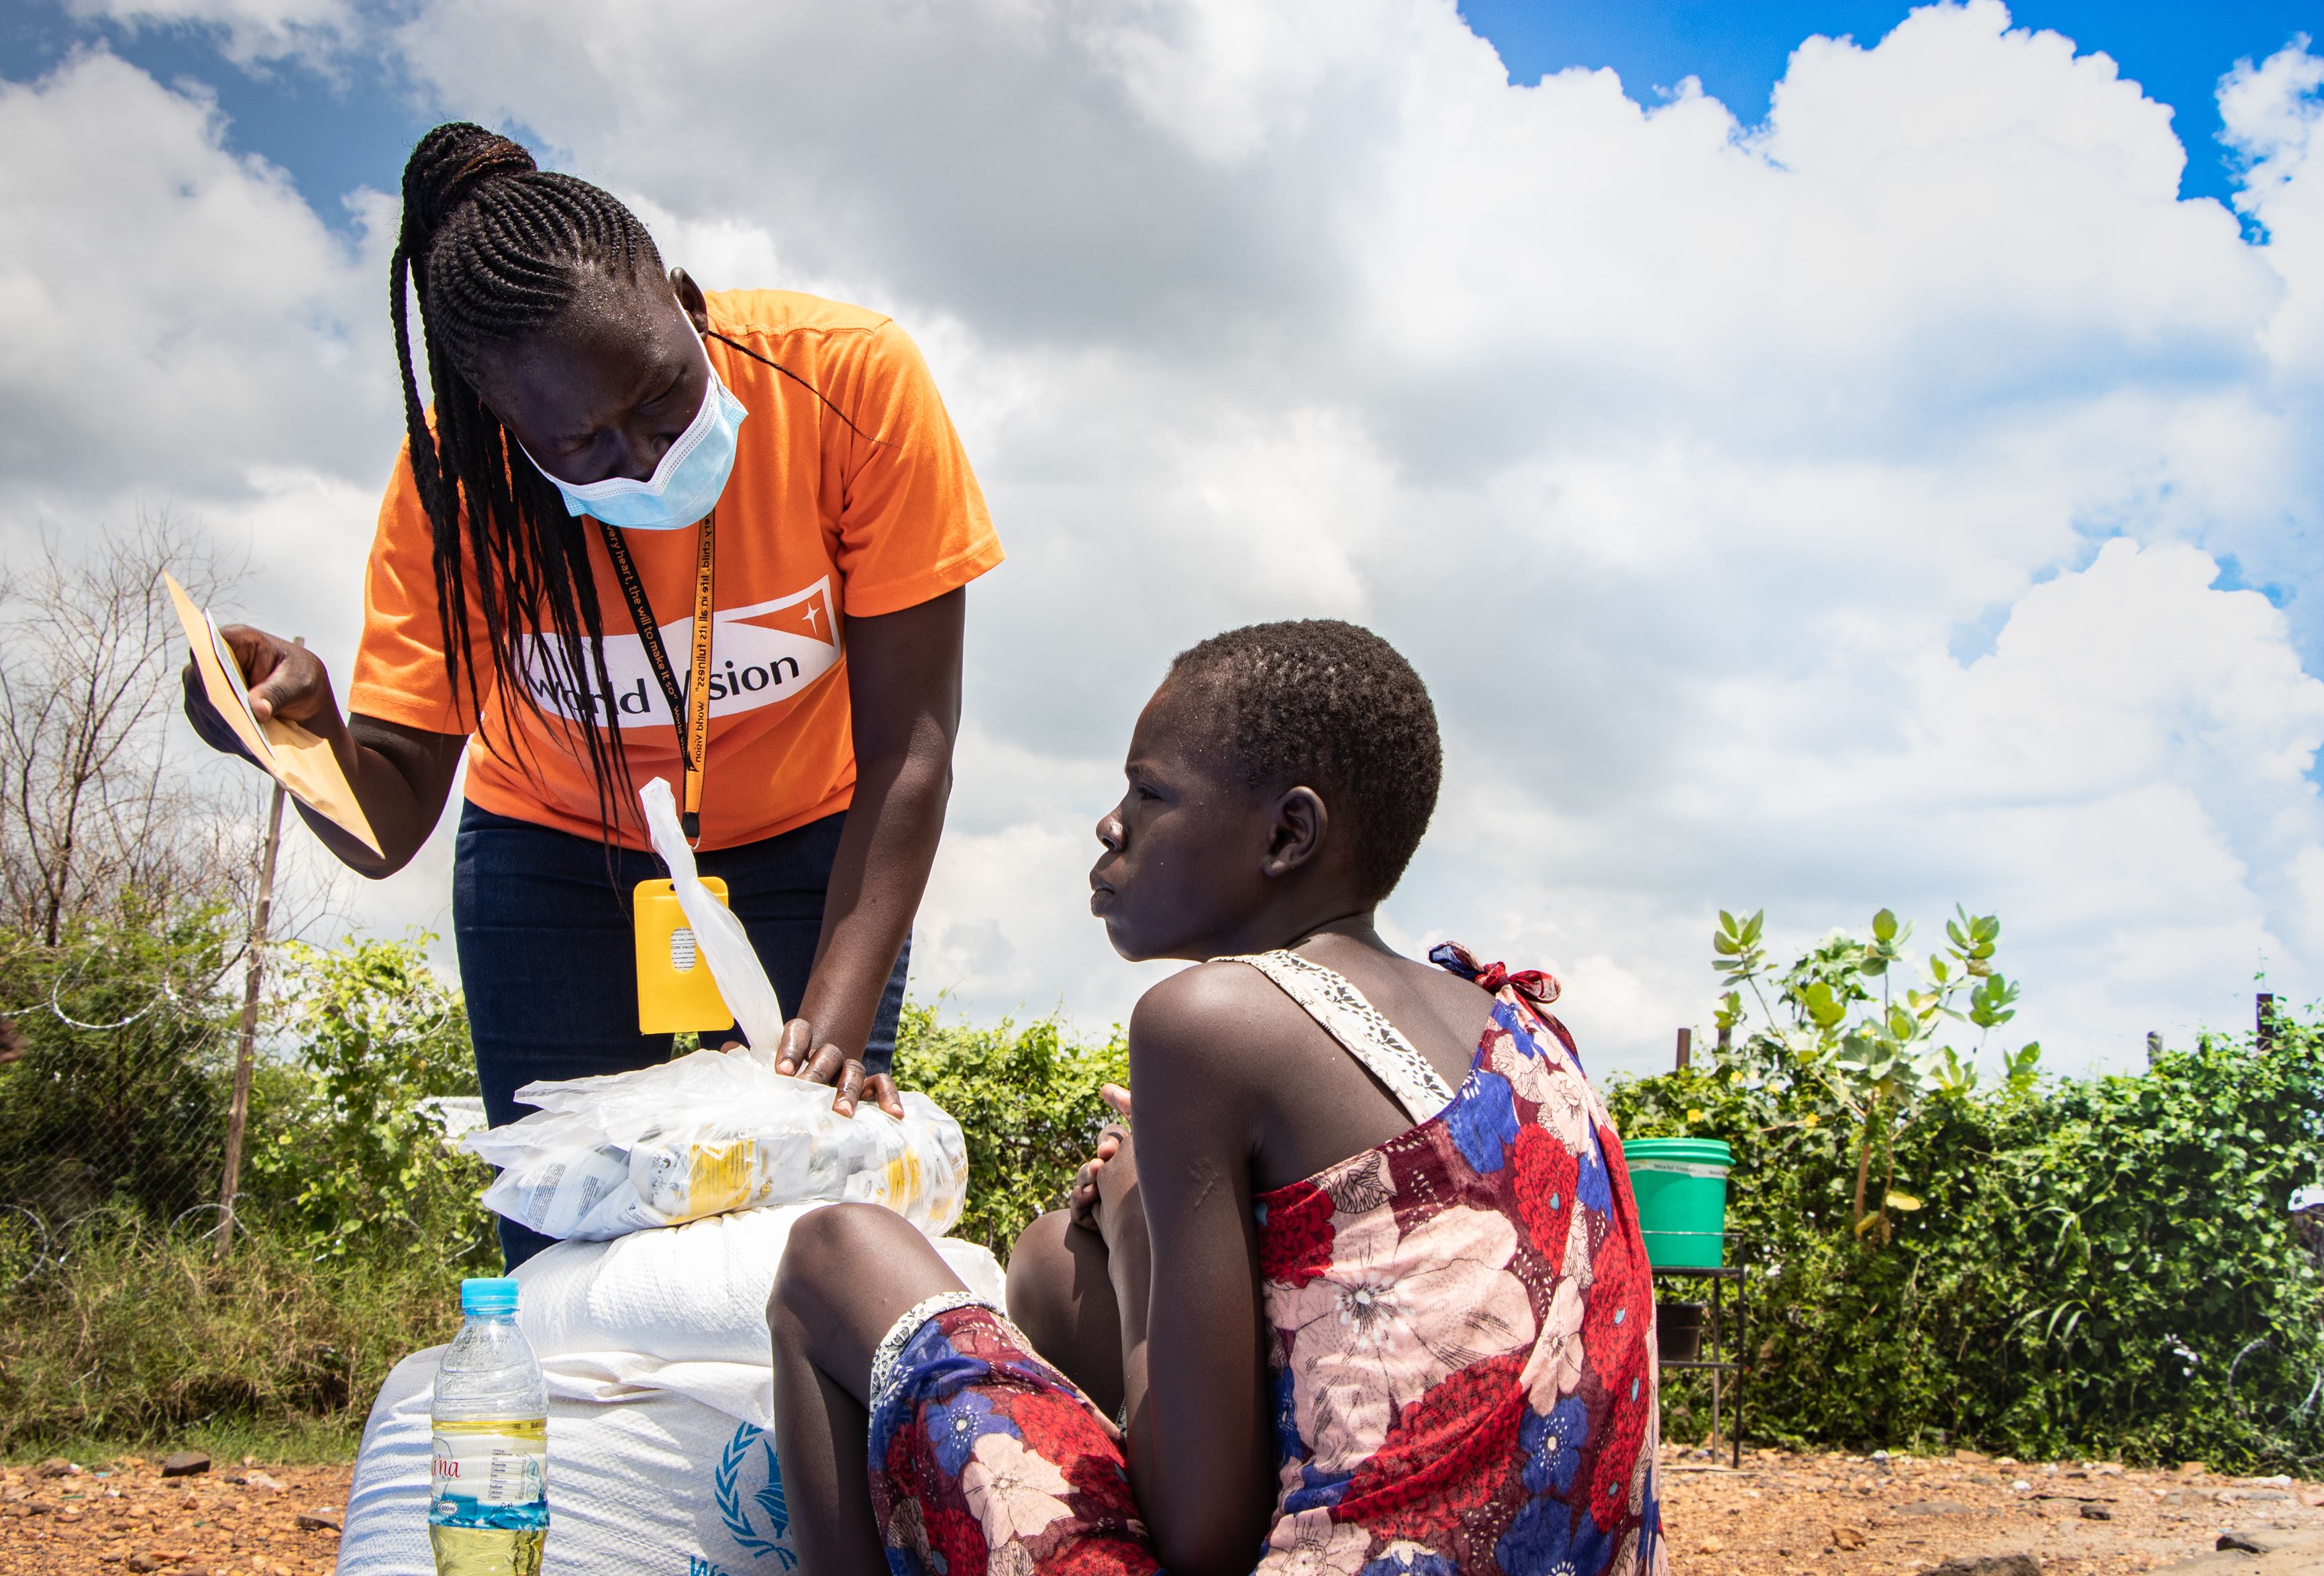 An empowered woman and a humanitarian South Sudan